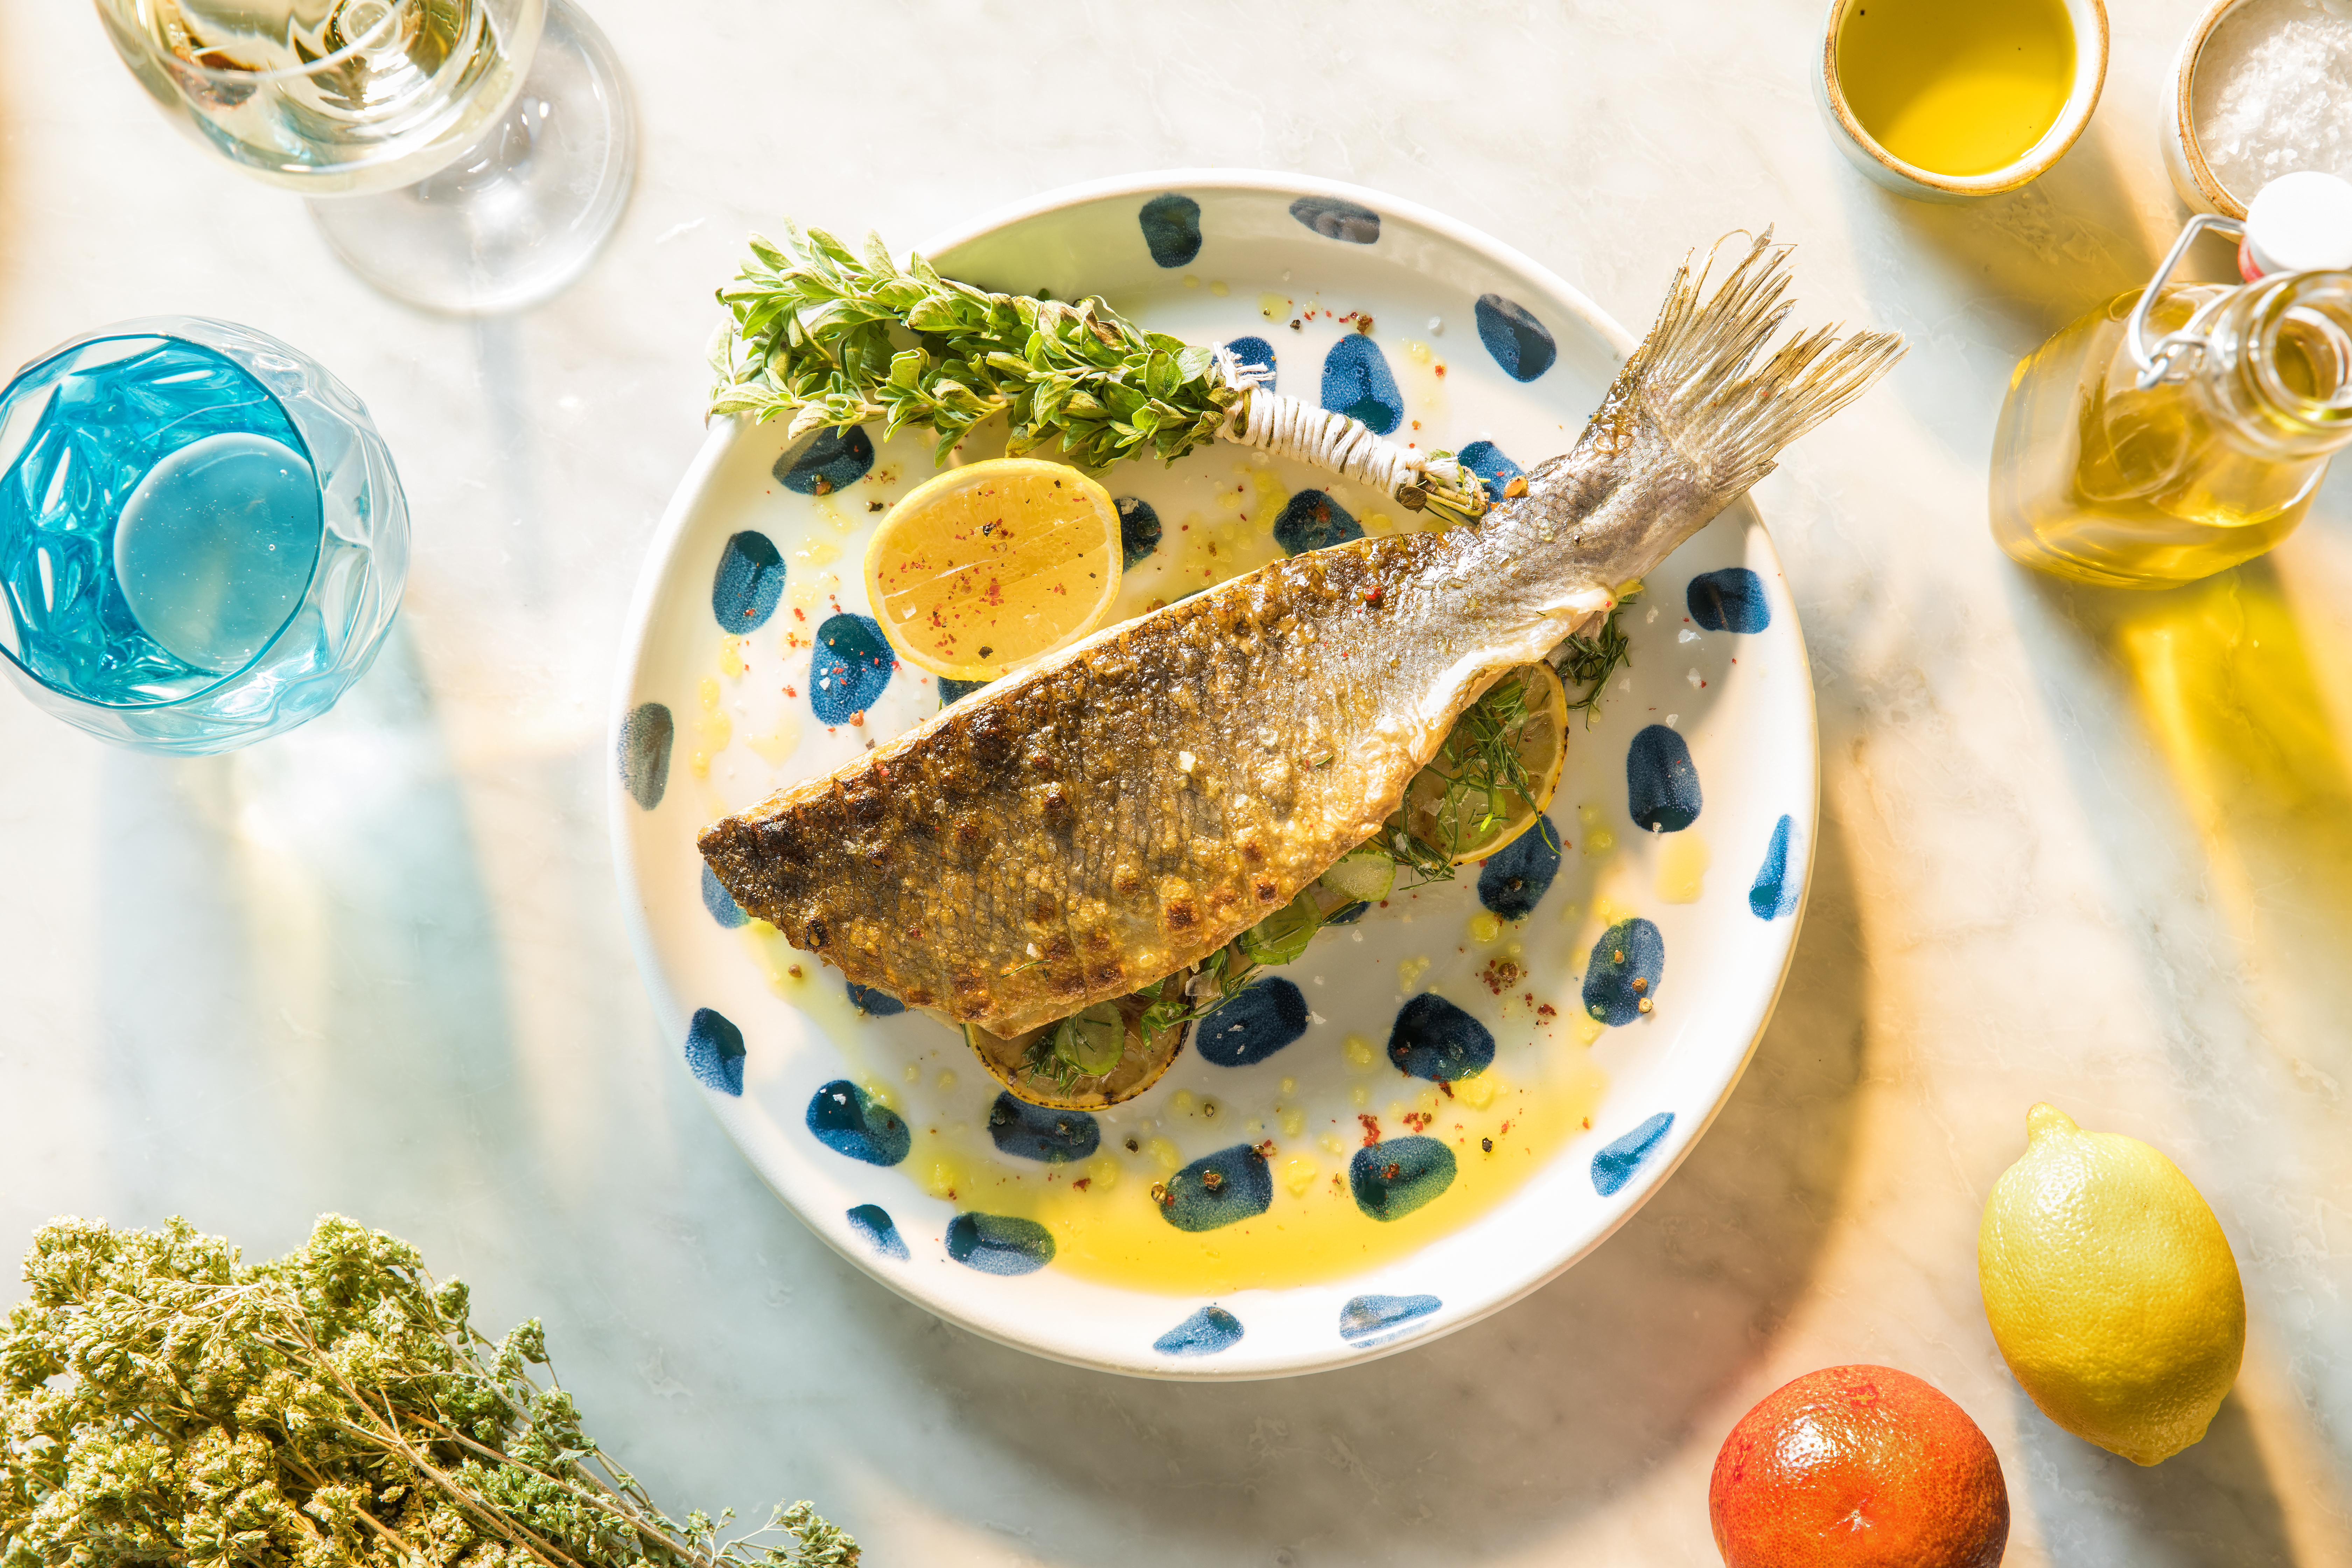 Grilled branzino on a white plate with blue spots